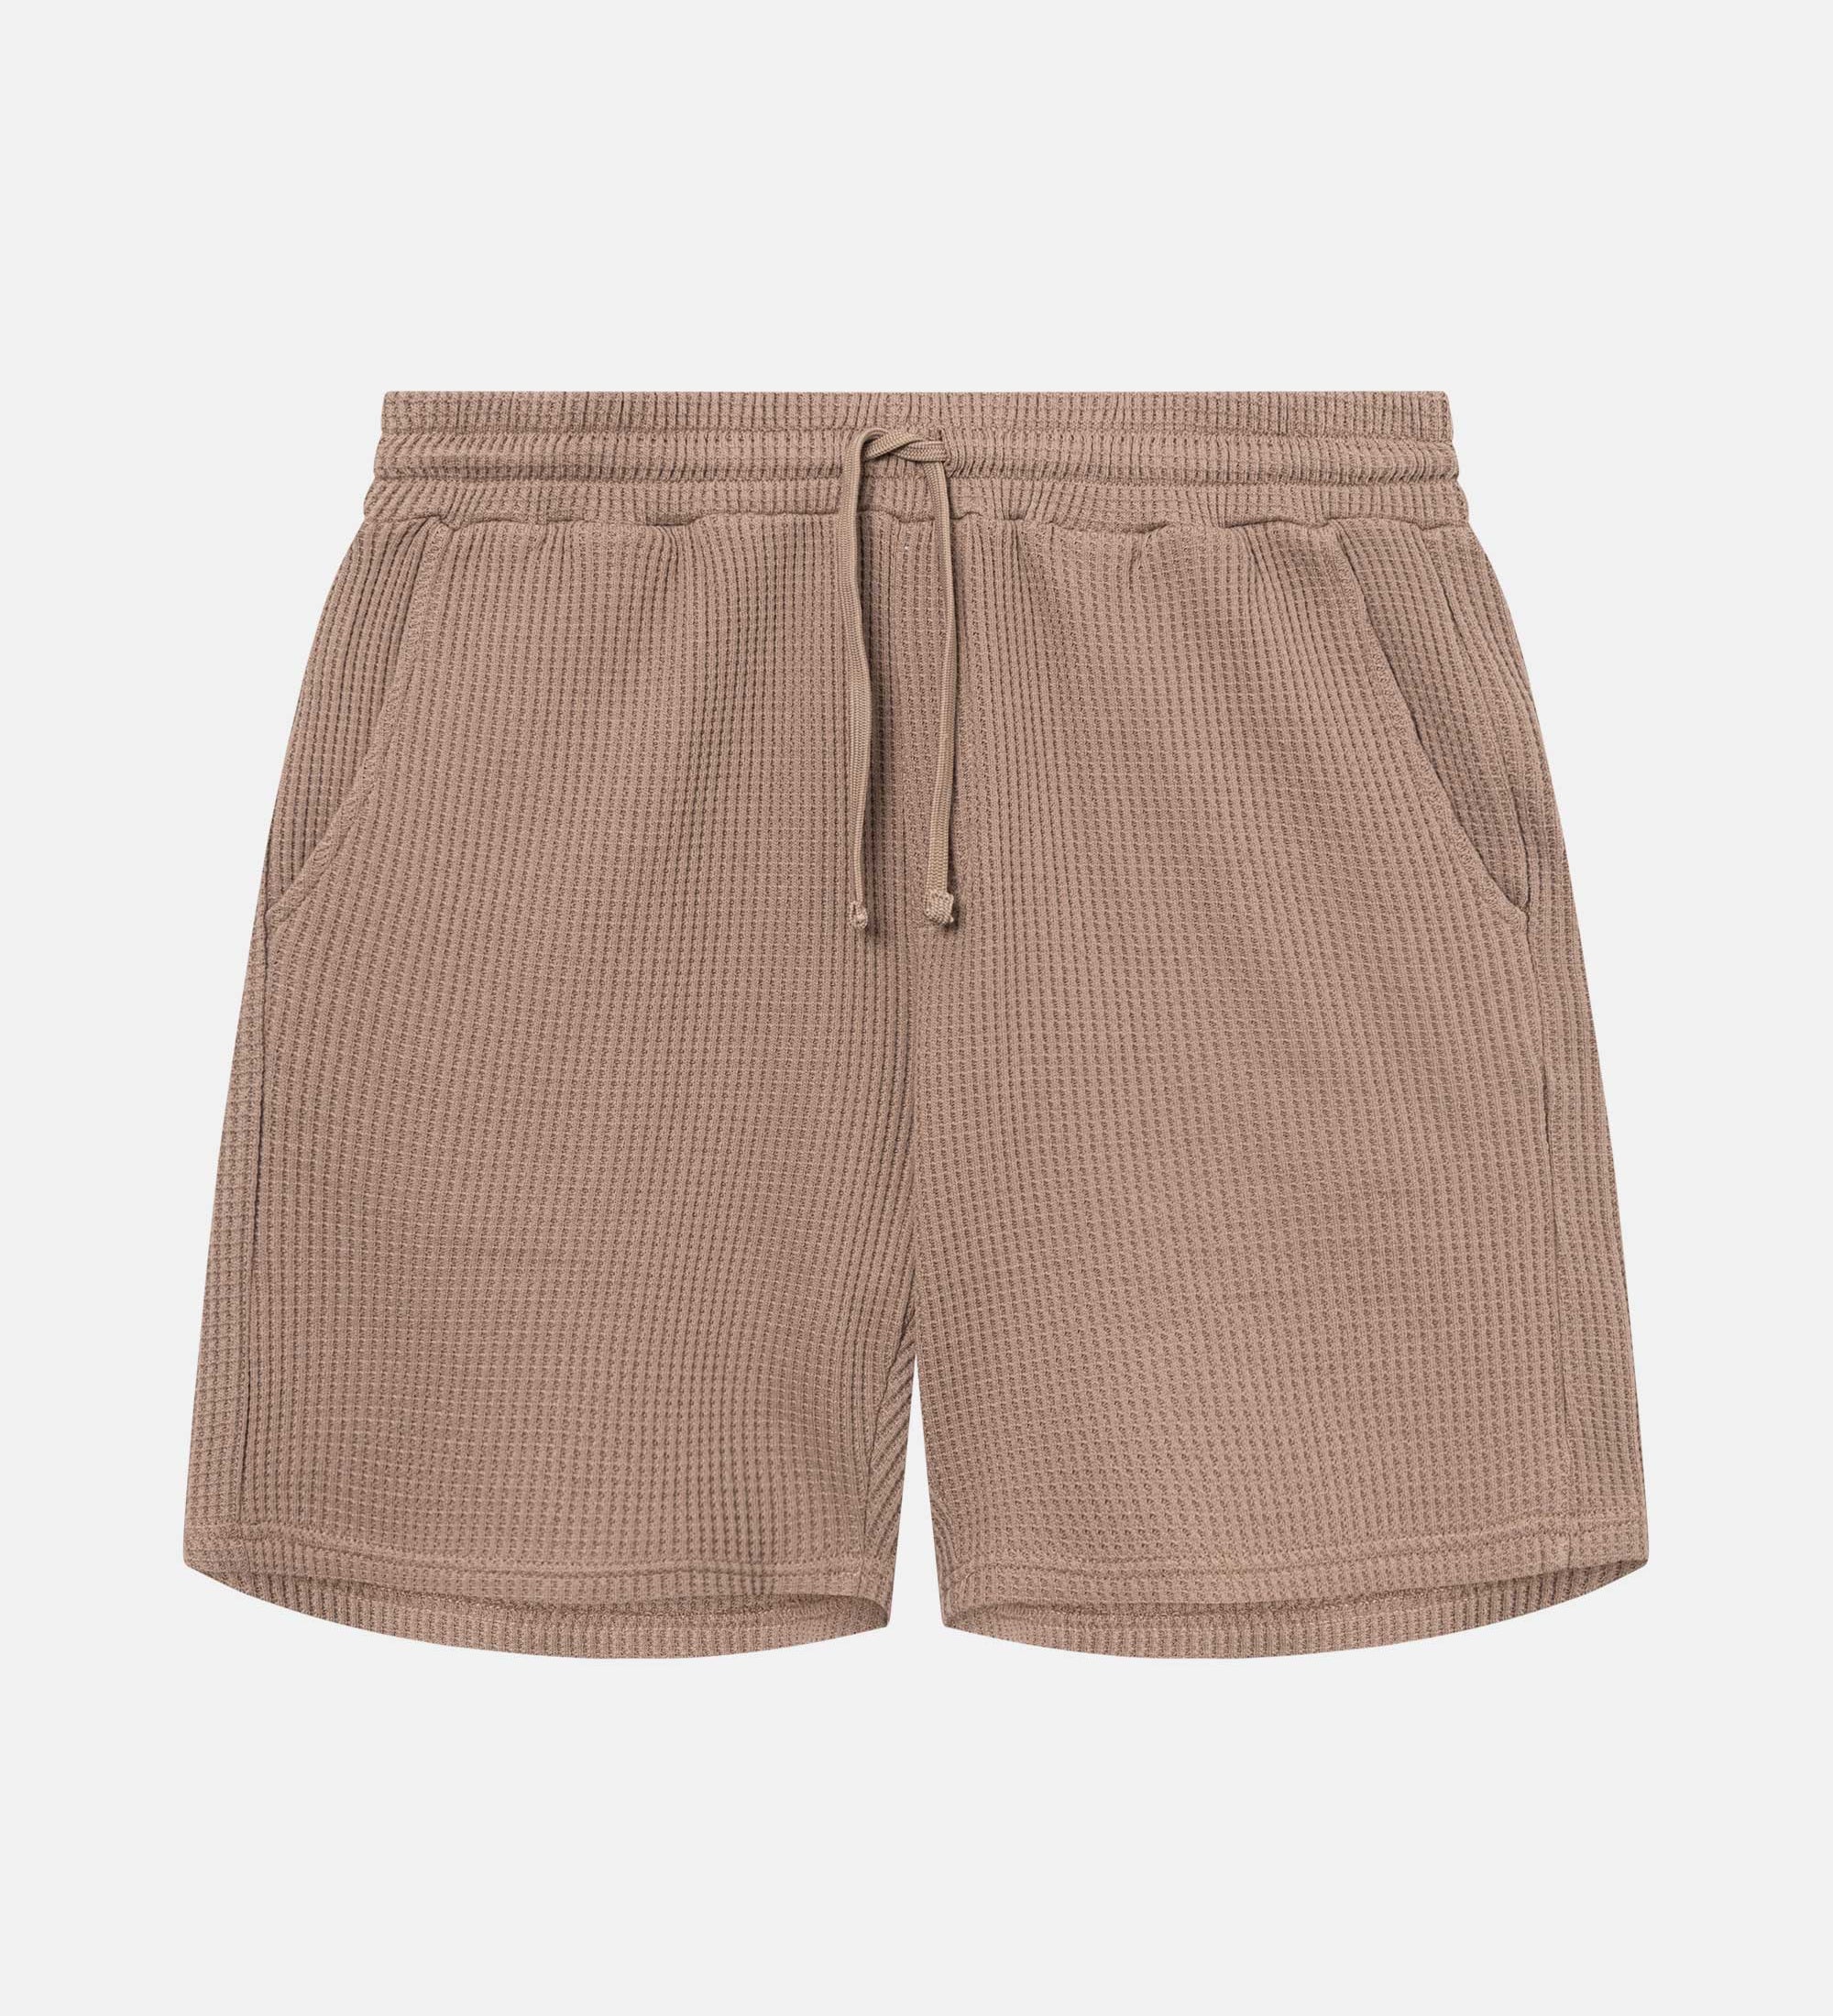 Brown waffle-patterned mid-length shorts with two front pockets and a drawstring.